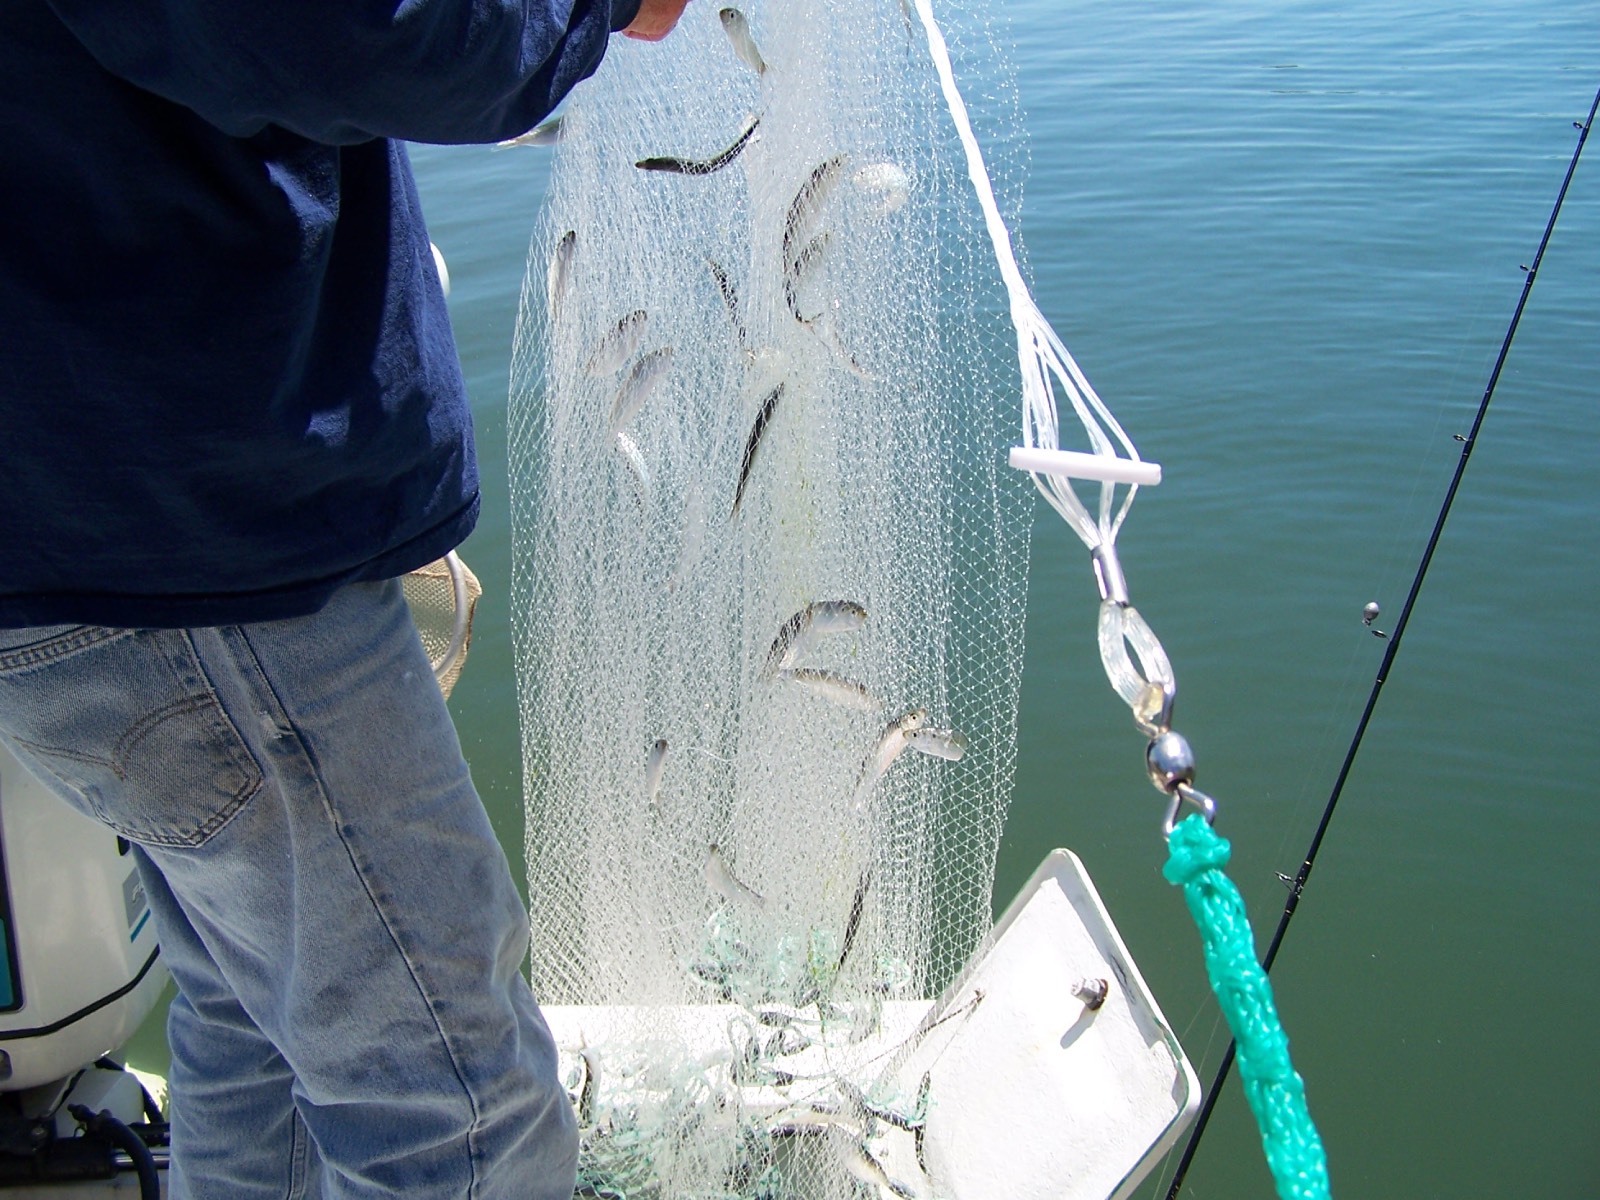 How to Care for Live Bait